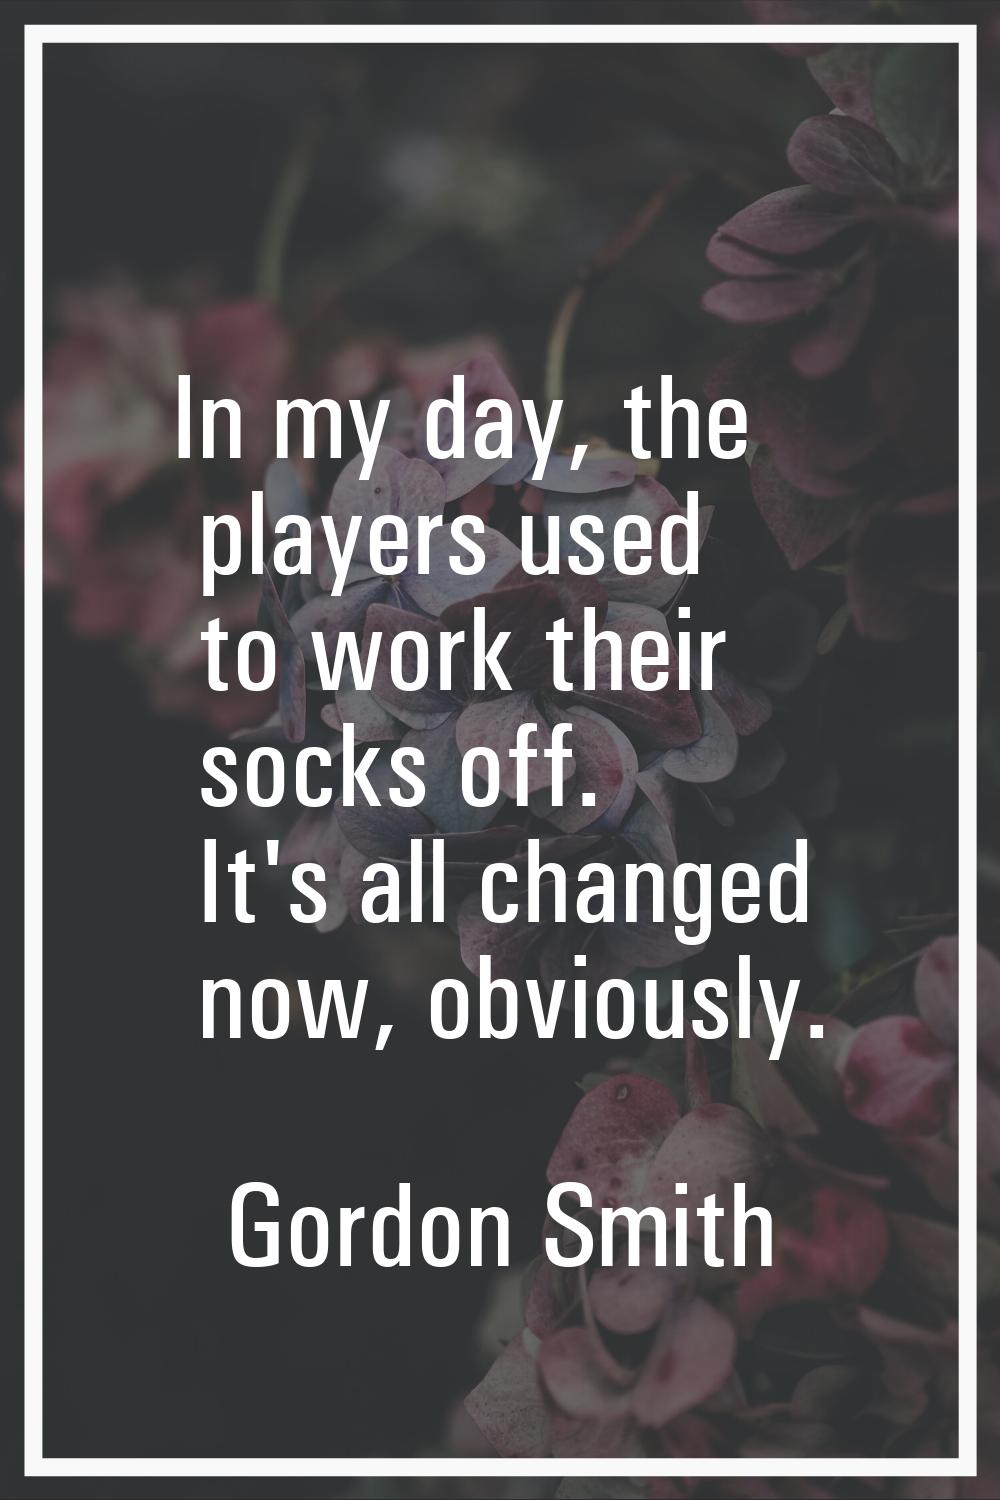 In my day, the players used to work their socks off. It's all changed now, obviously.